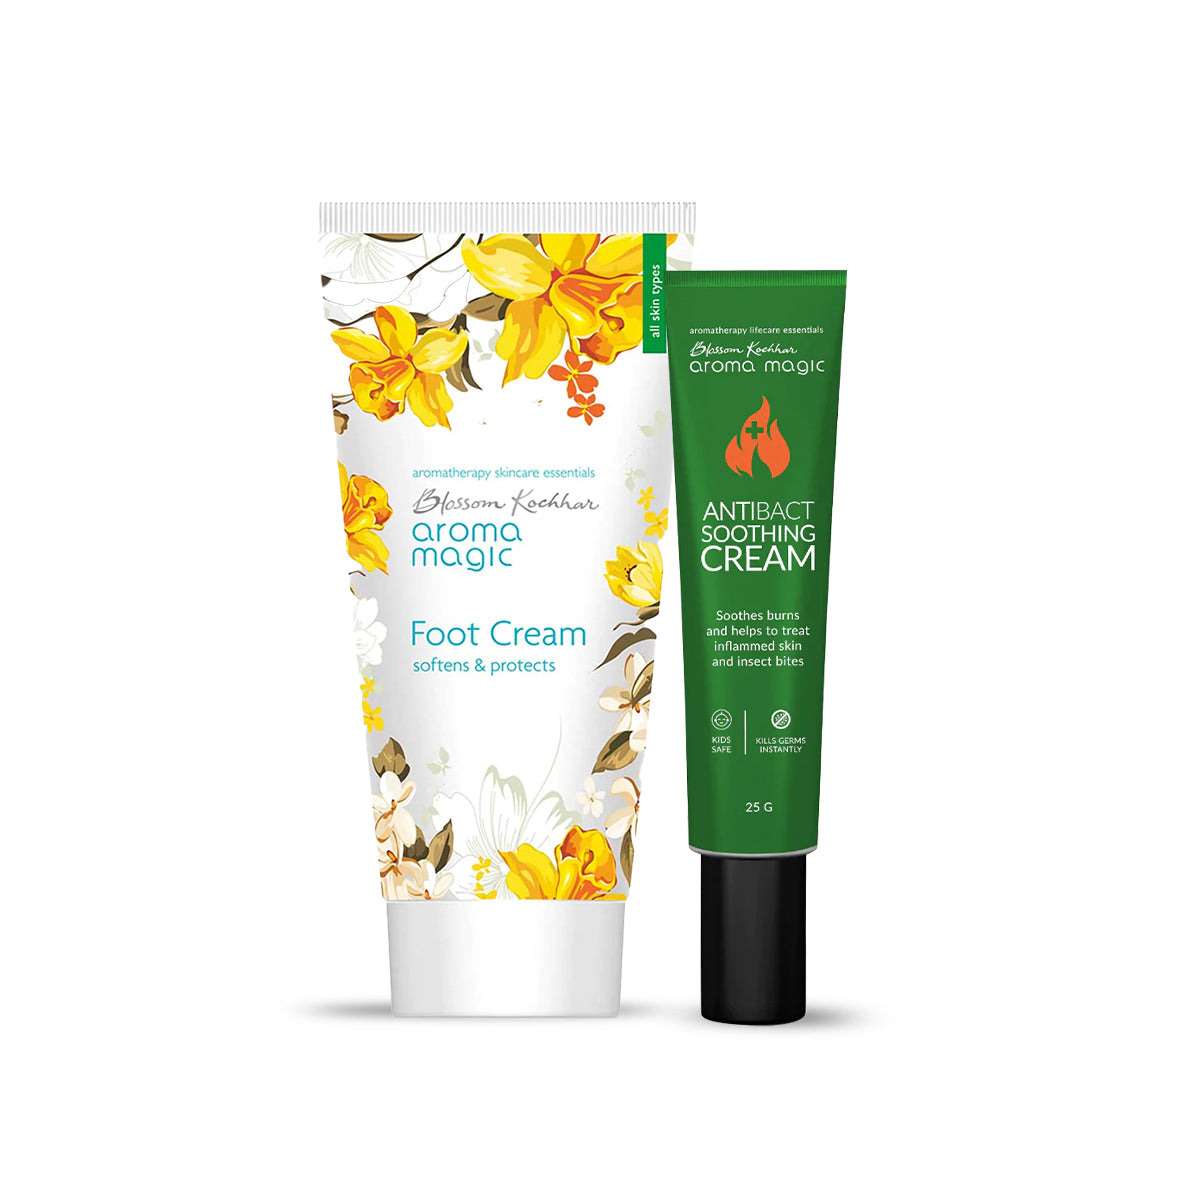 Foot Cream & Anti-Bact Soothing Combo